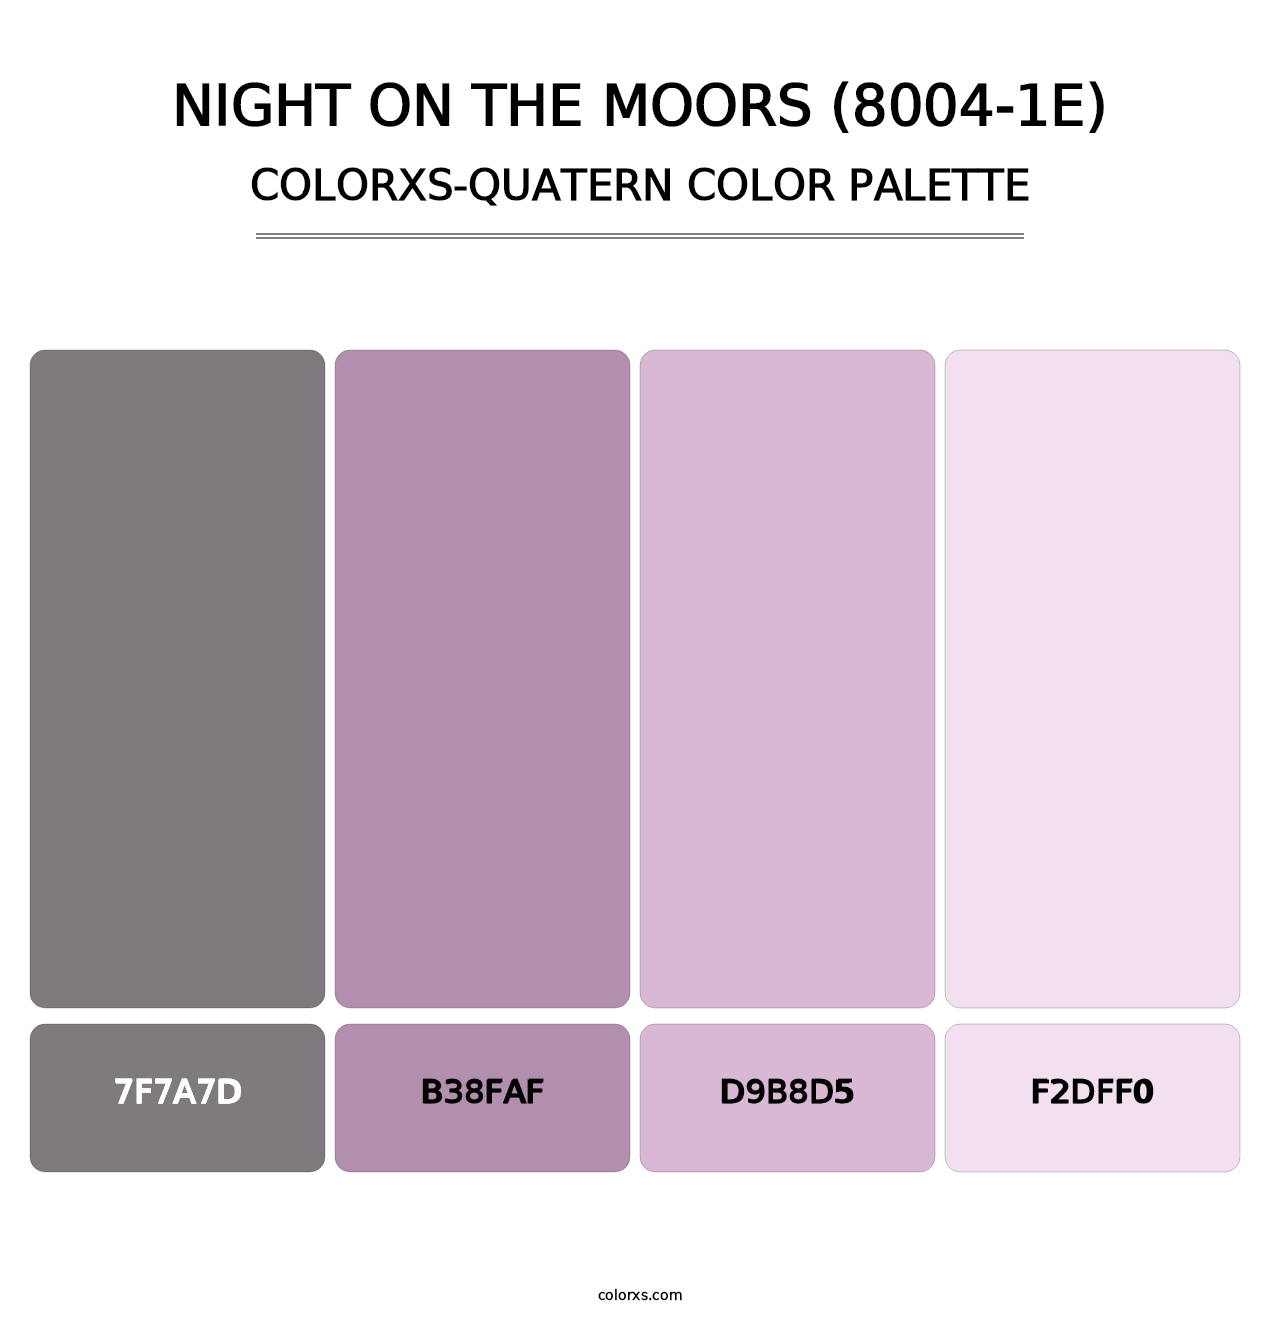 Night on the Moors (8004-1E) - Colorxs Quatern Palette